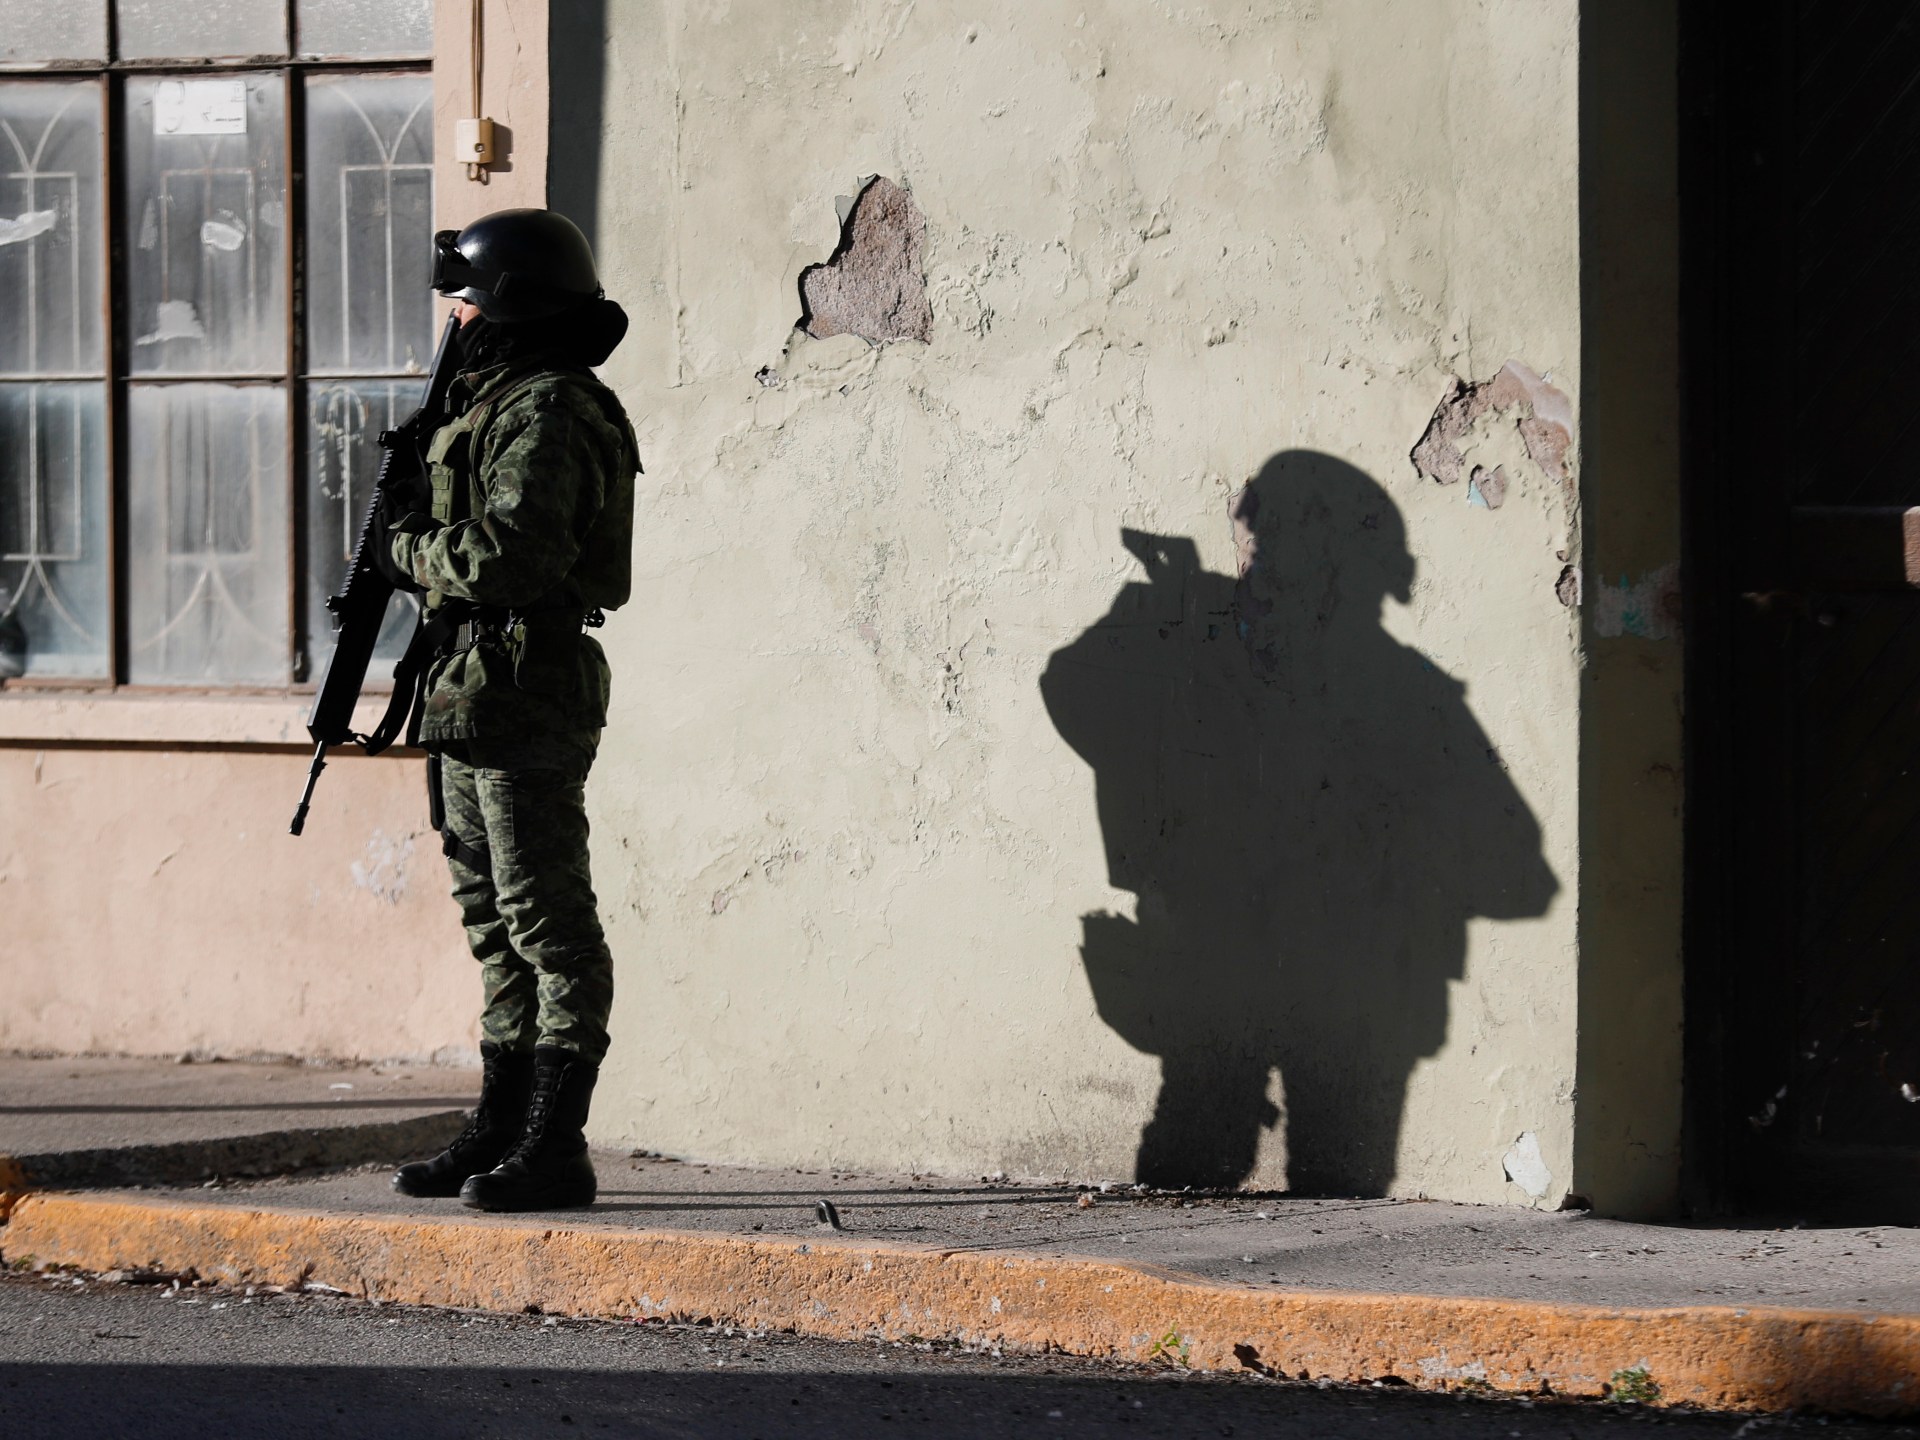 attack-in-mexican-town-kills-20-including-mayor-officials-say